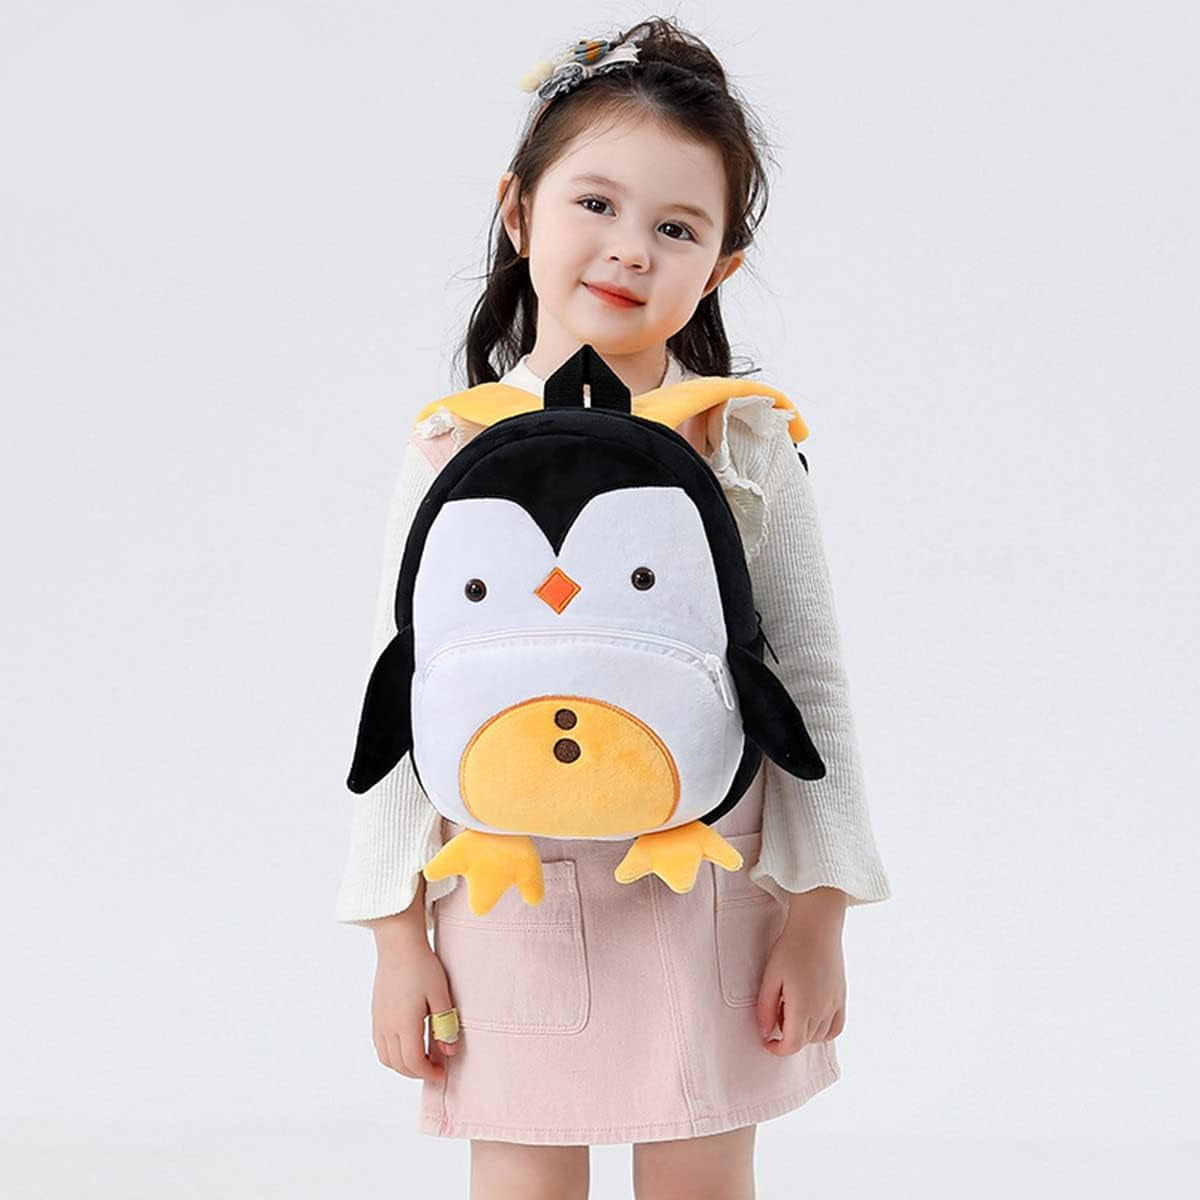 Toddler Backpack for Boys and Girls, Cute Soft Plush Animal Cartoon Mini Backpack Little for Kids 2-6 Years (Unicorn)